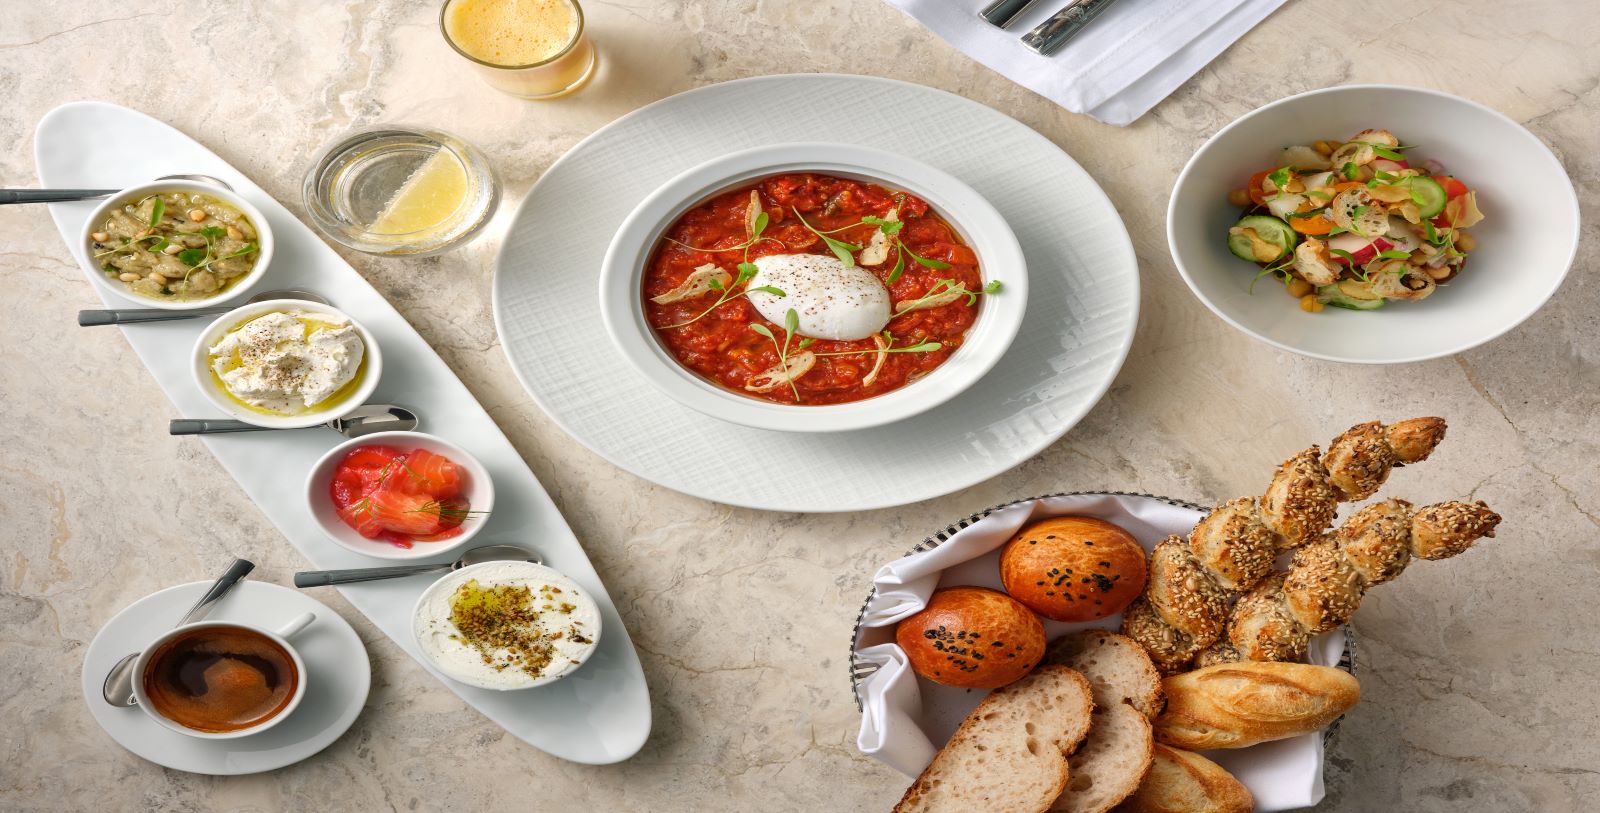 Taste a brunch specialty, Shakshuka, a rich and spicy stew with poached eggs.